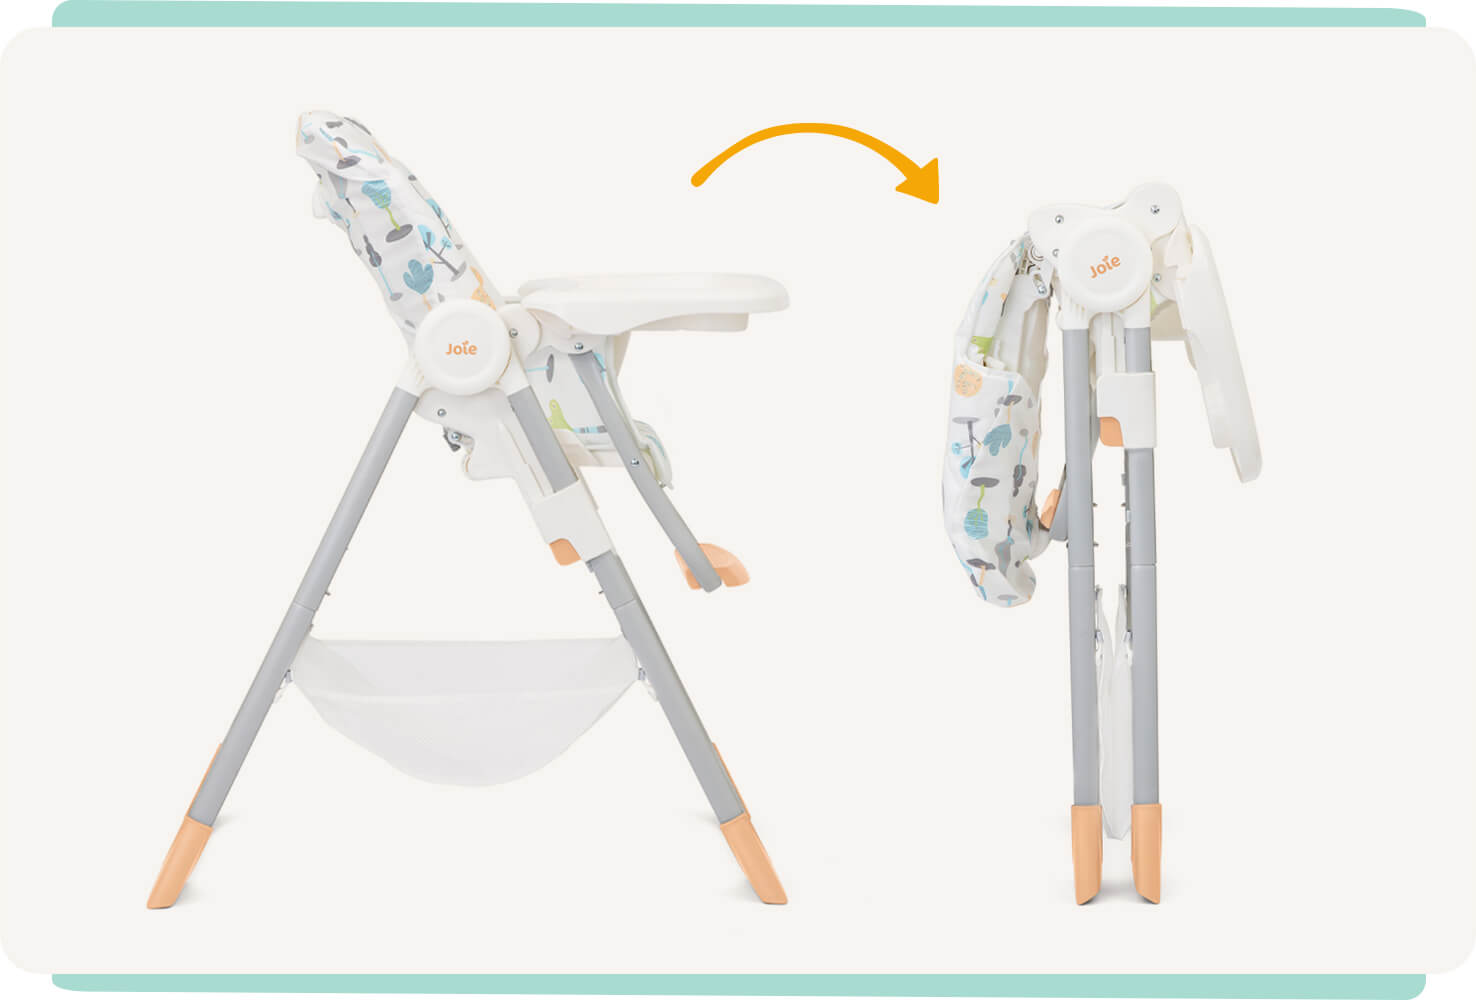 Two Joie Snacker 2in1 highchairs in a multi-color print featuring illustrations of different trees from a side view. One is pictured upright and the other is pictured folded with an arrow between them to indicate a compact fold.